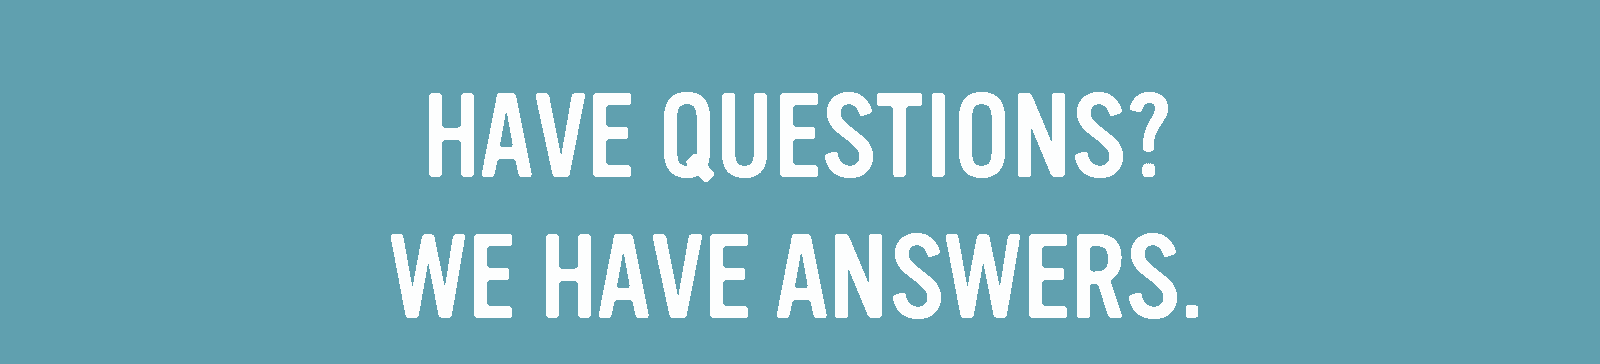 Have questions? We have answers. 